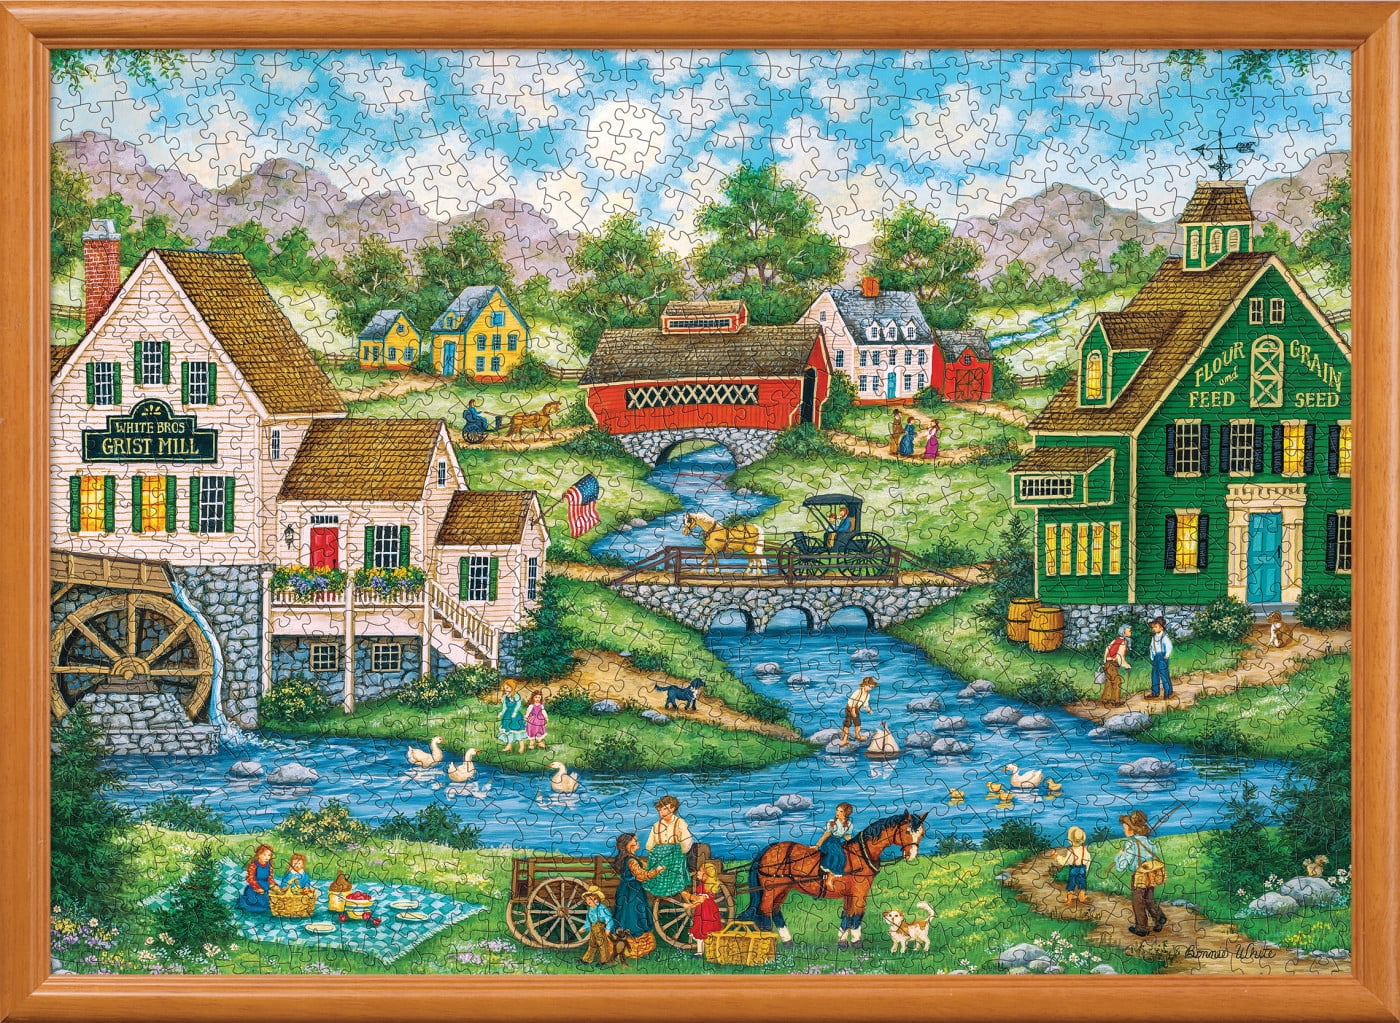 Signature - On the Boardwalk 3000 Piece Puzzle By Art Poulin – Flawed